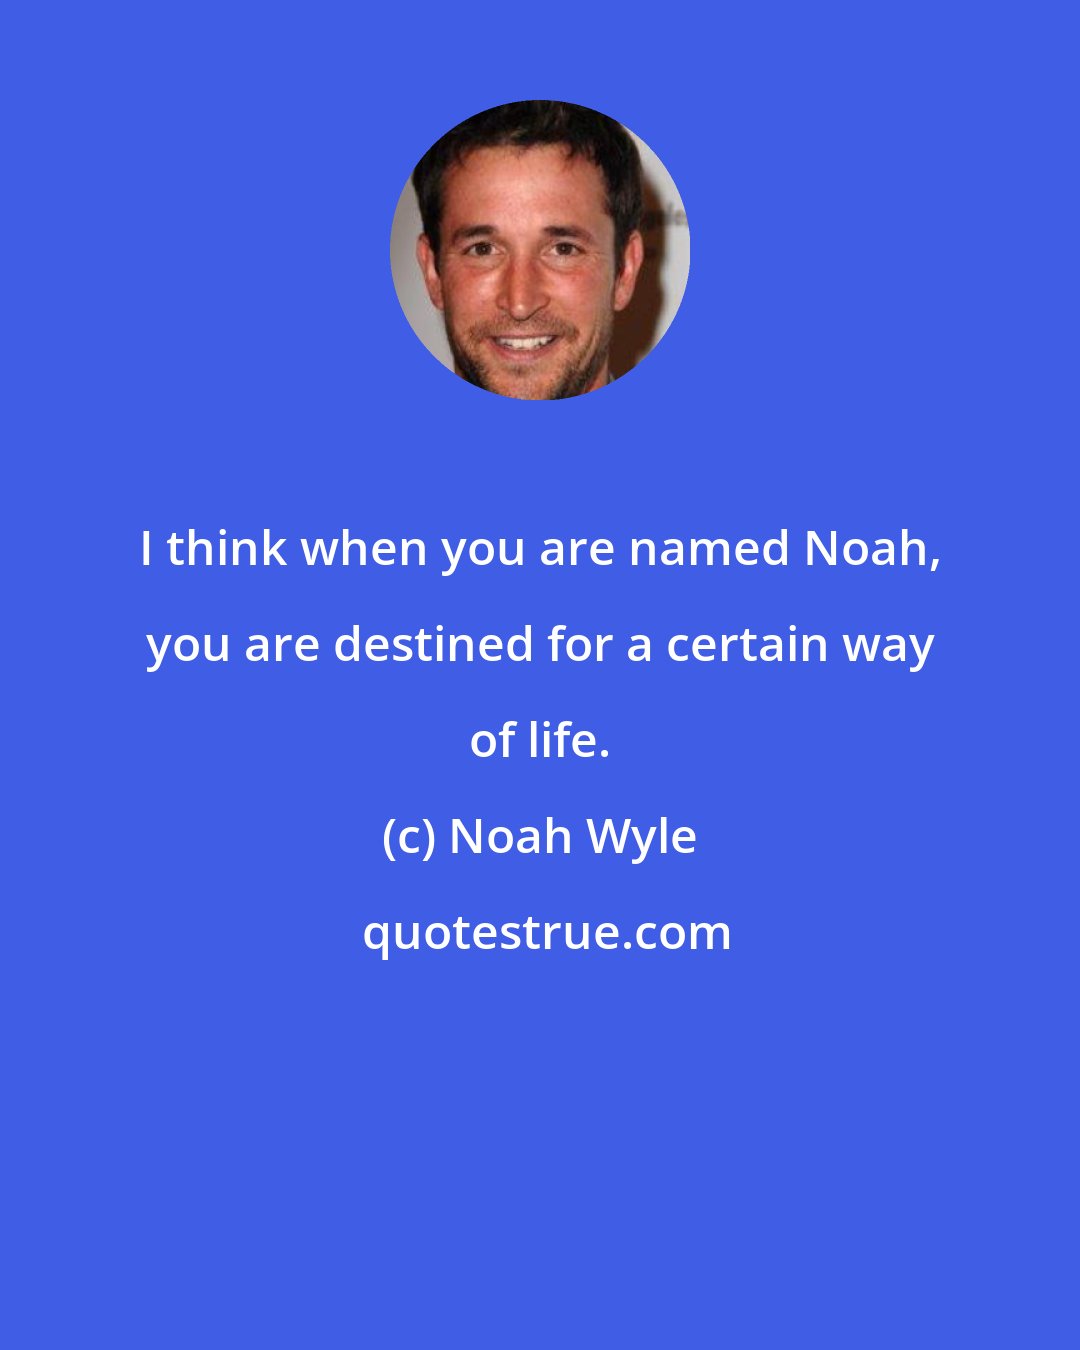 Noah Wyle: I think when you are named Noah, you are destined for a certain way of life.